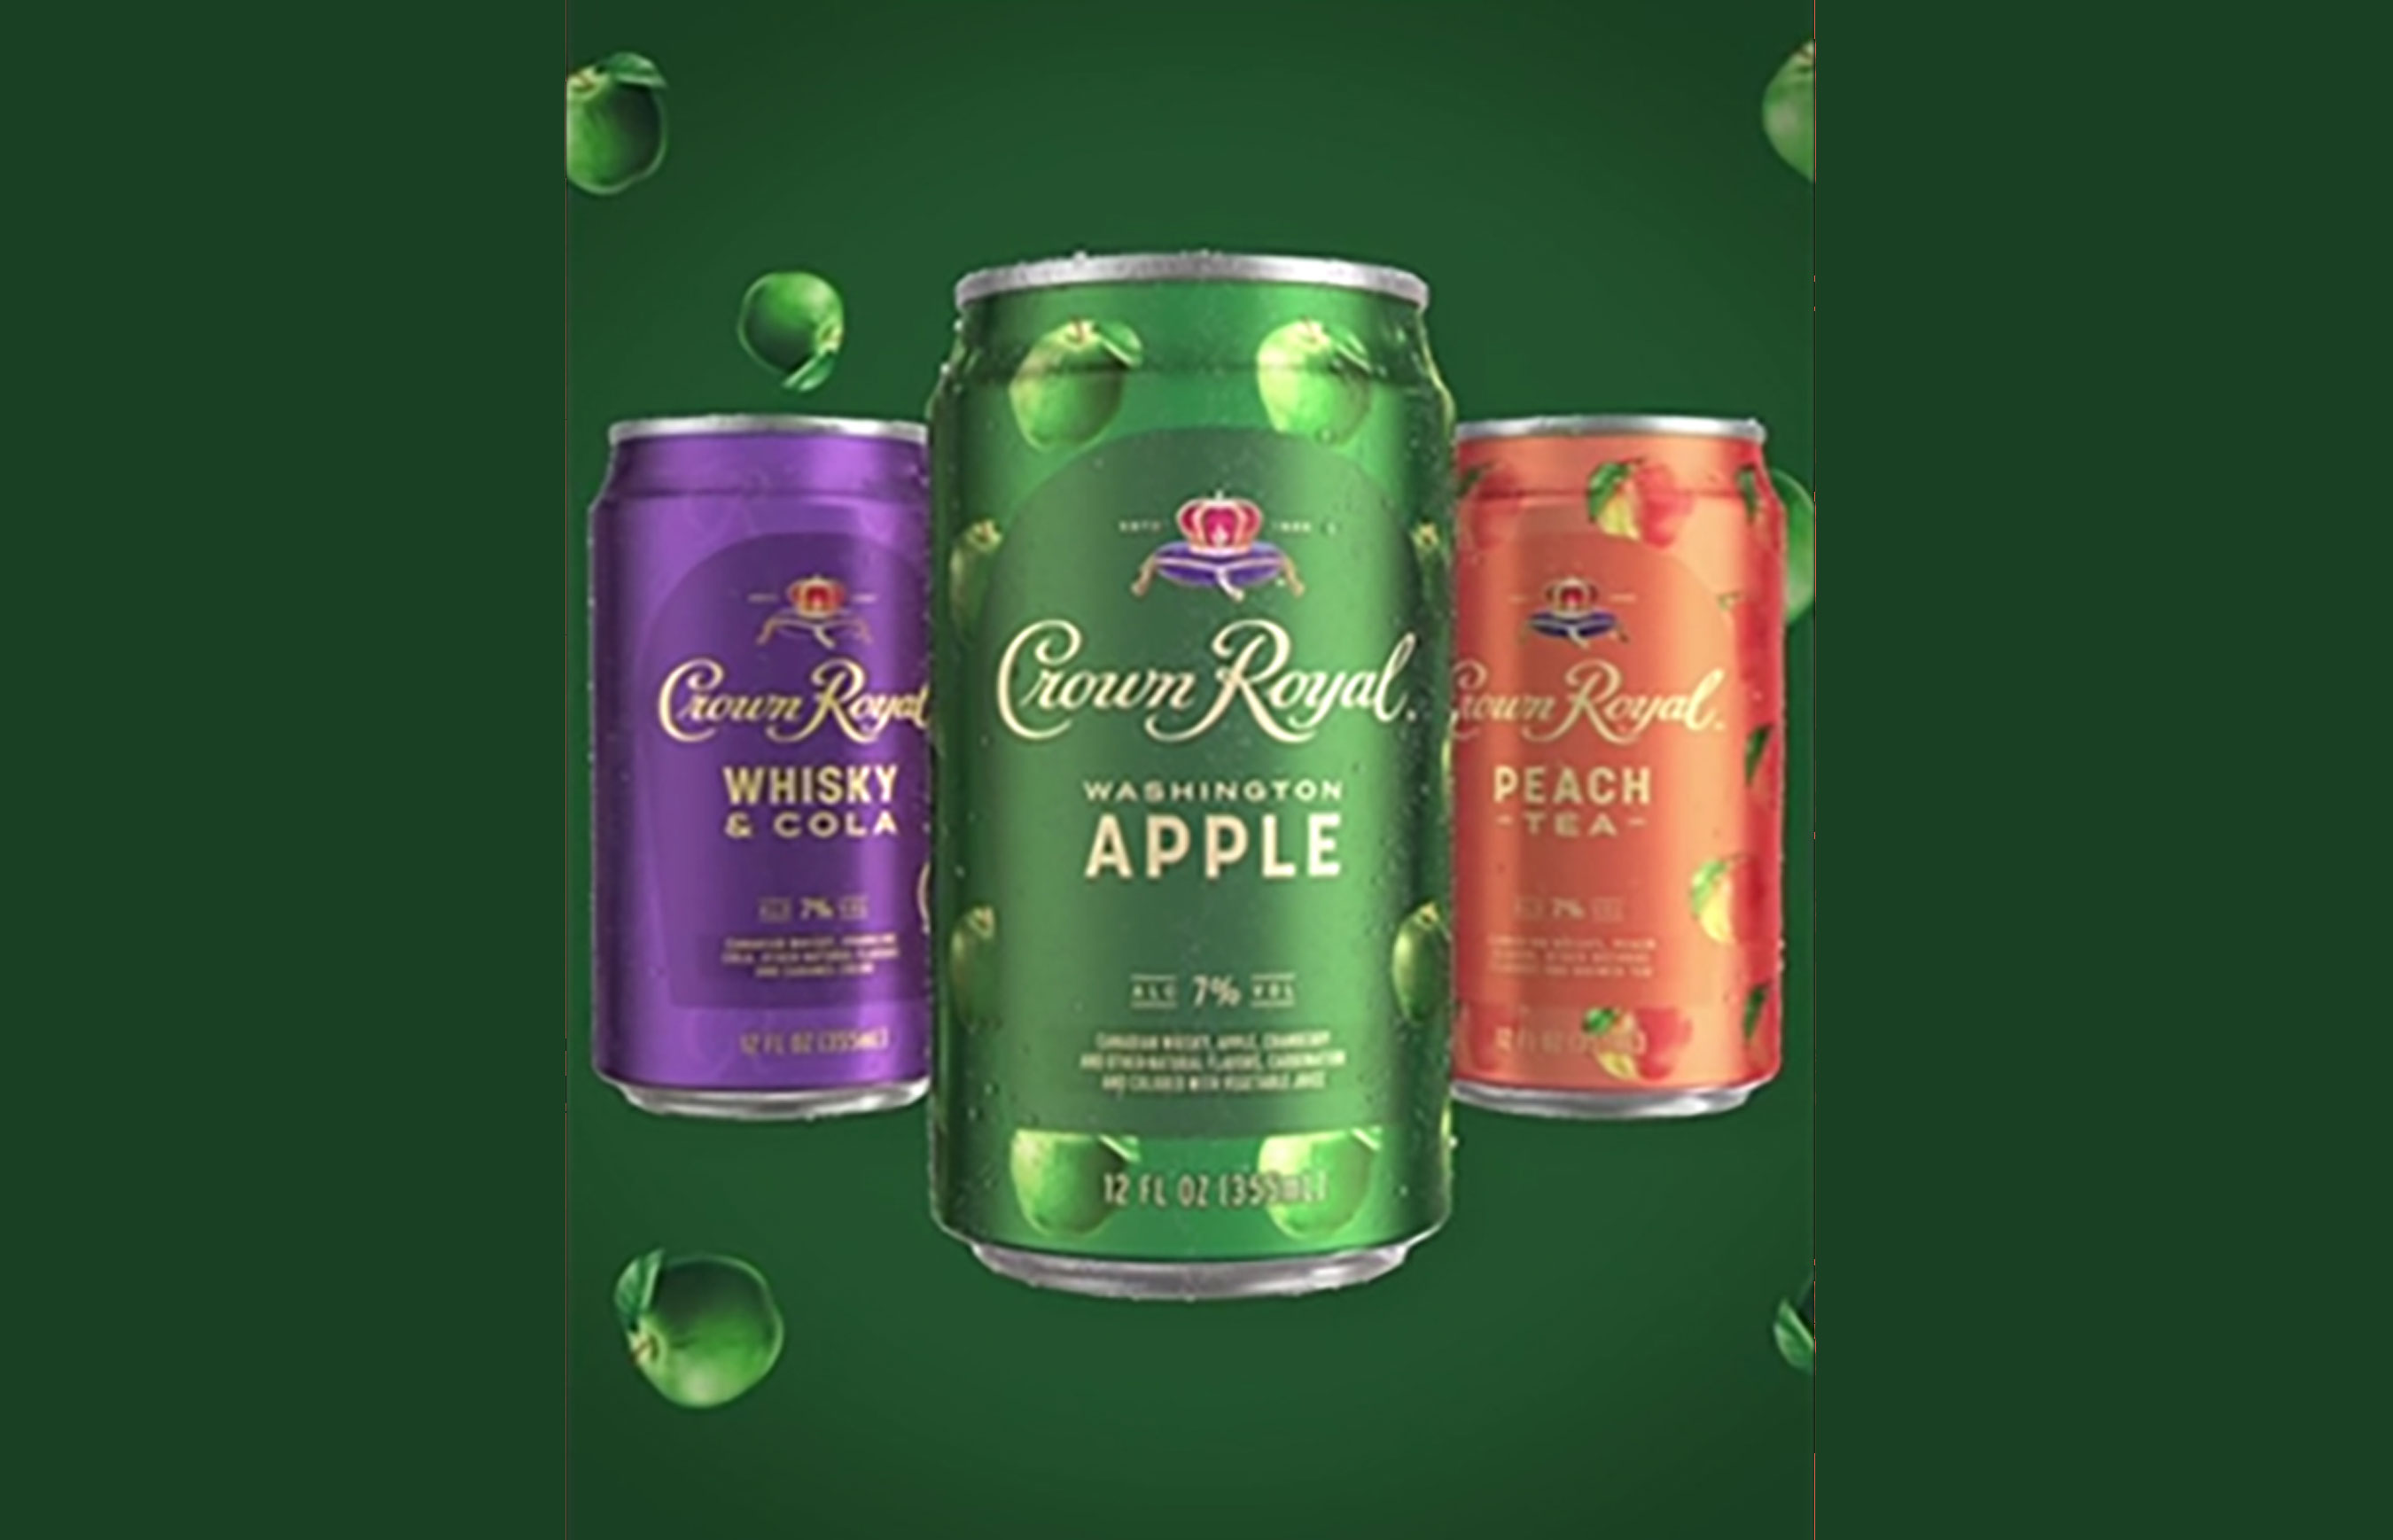 Play Video: Washington Apple featuring Crown Royal whisky, apple and sparkling cranberry flavors